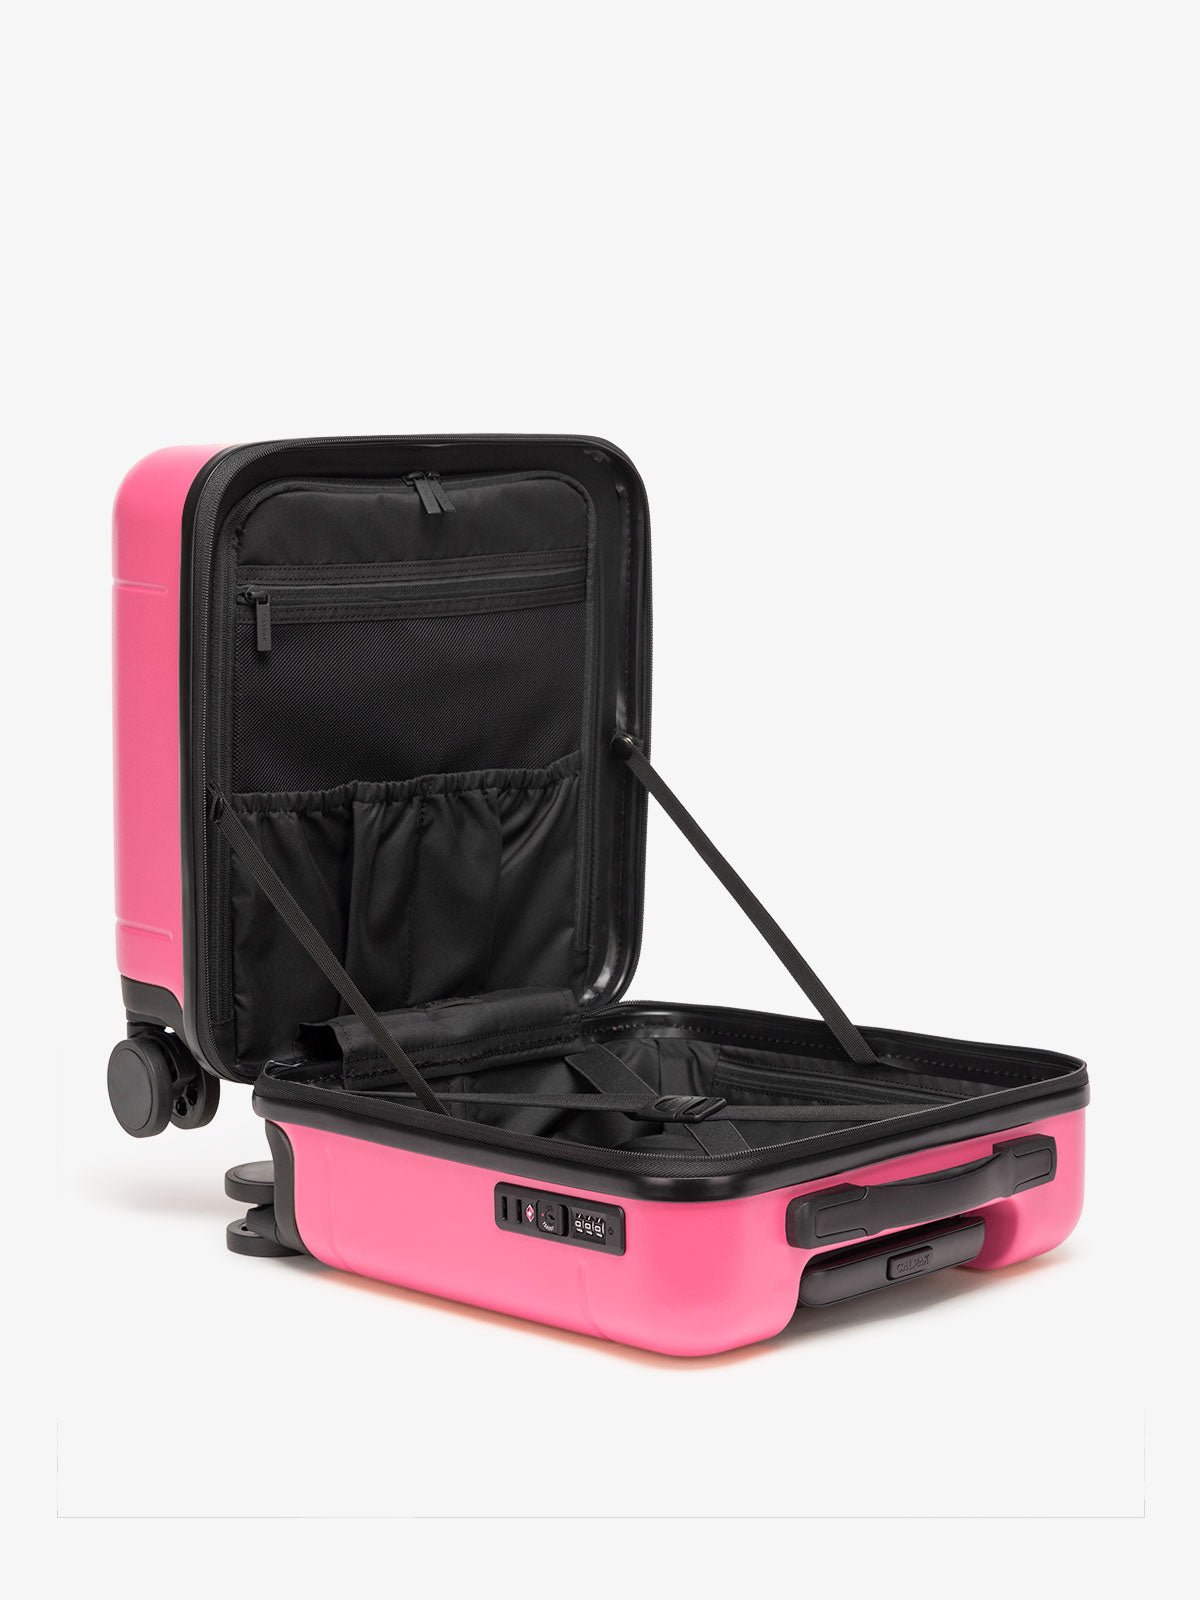 Hue small carry-on featuring compression straps in hot pink